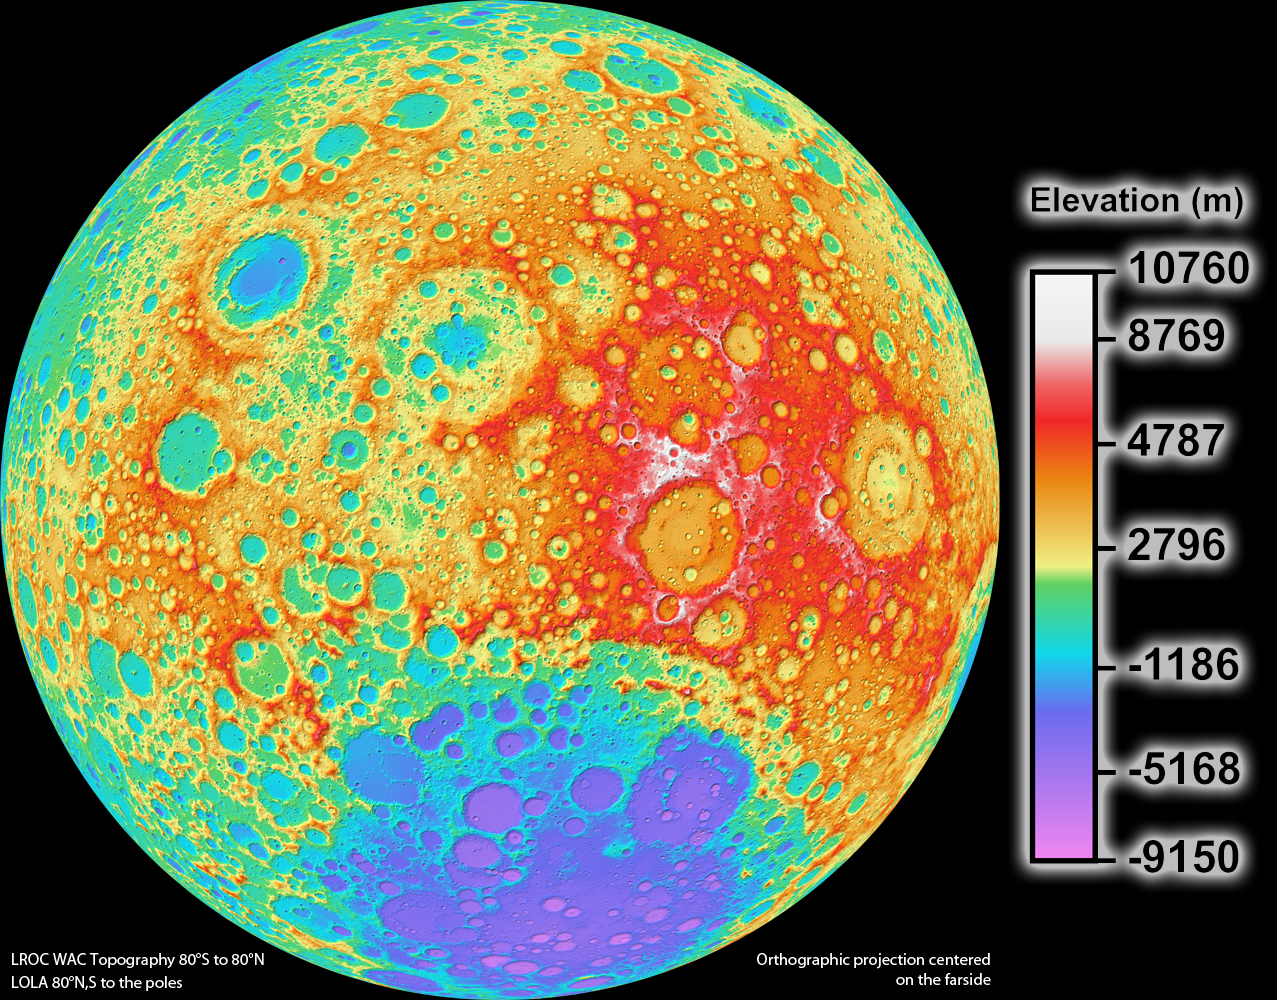 topographic map of the rugged lunar surface with bright colors representing altitudes ranging from -9150 to 10760 m